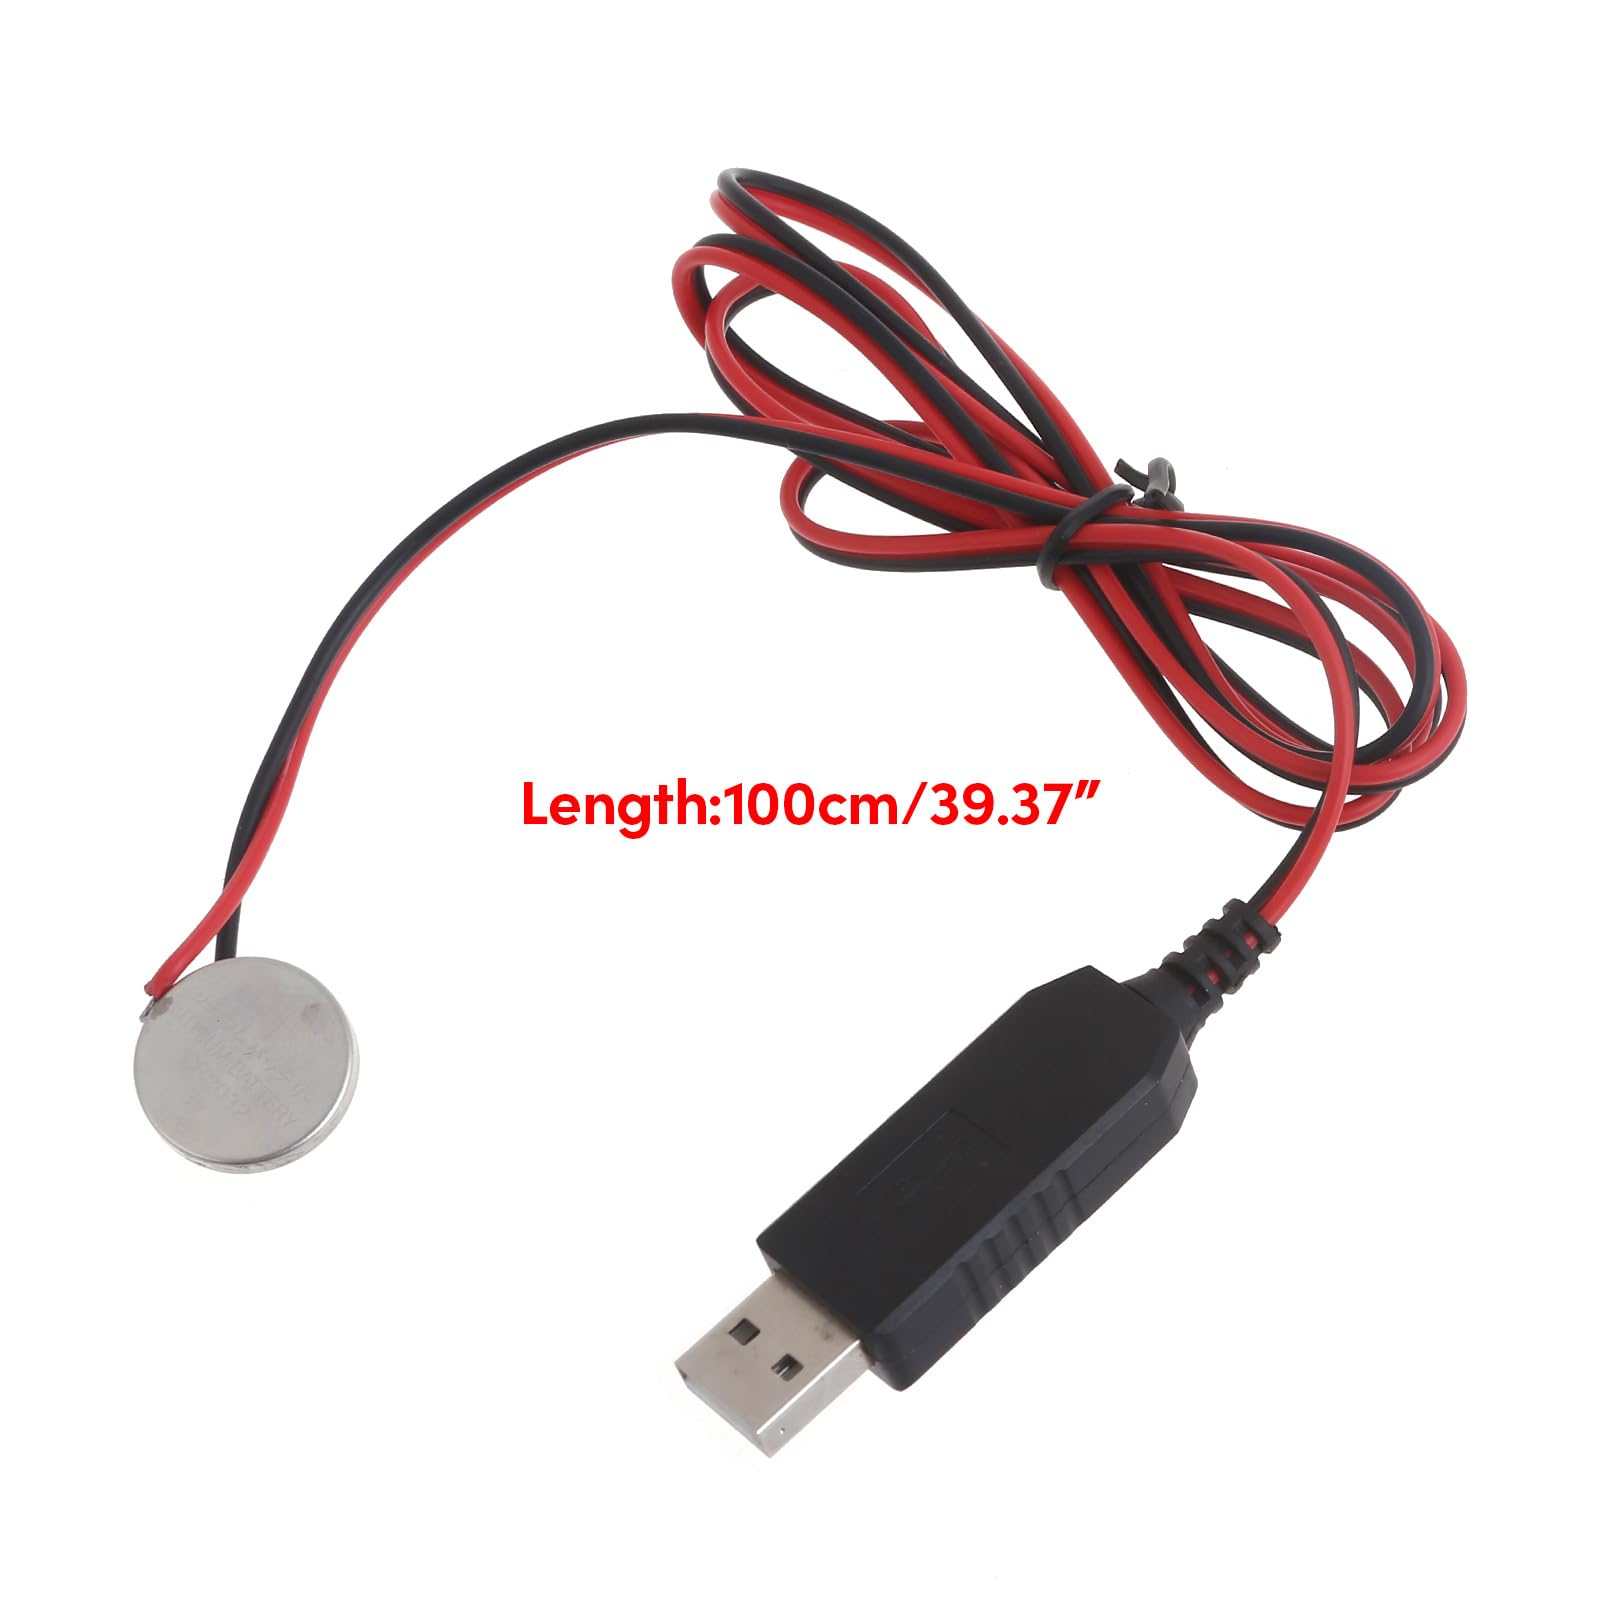 Shinycome to 3V CR2032 Battery Charging Cable Cord for CR2032 3V Button Battery Powered Watch Remote Control Toy Type-C to 3V Battery Replacement